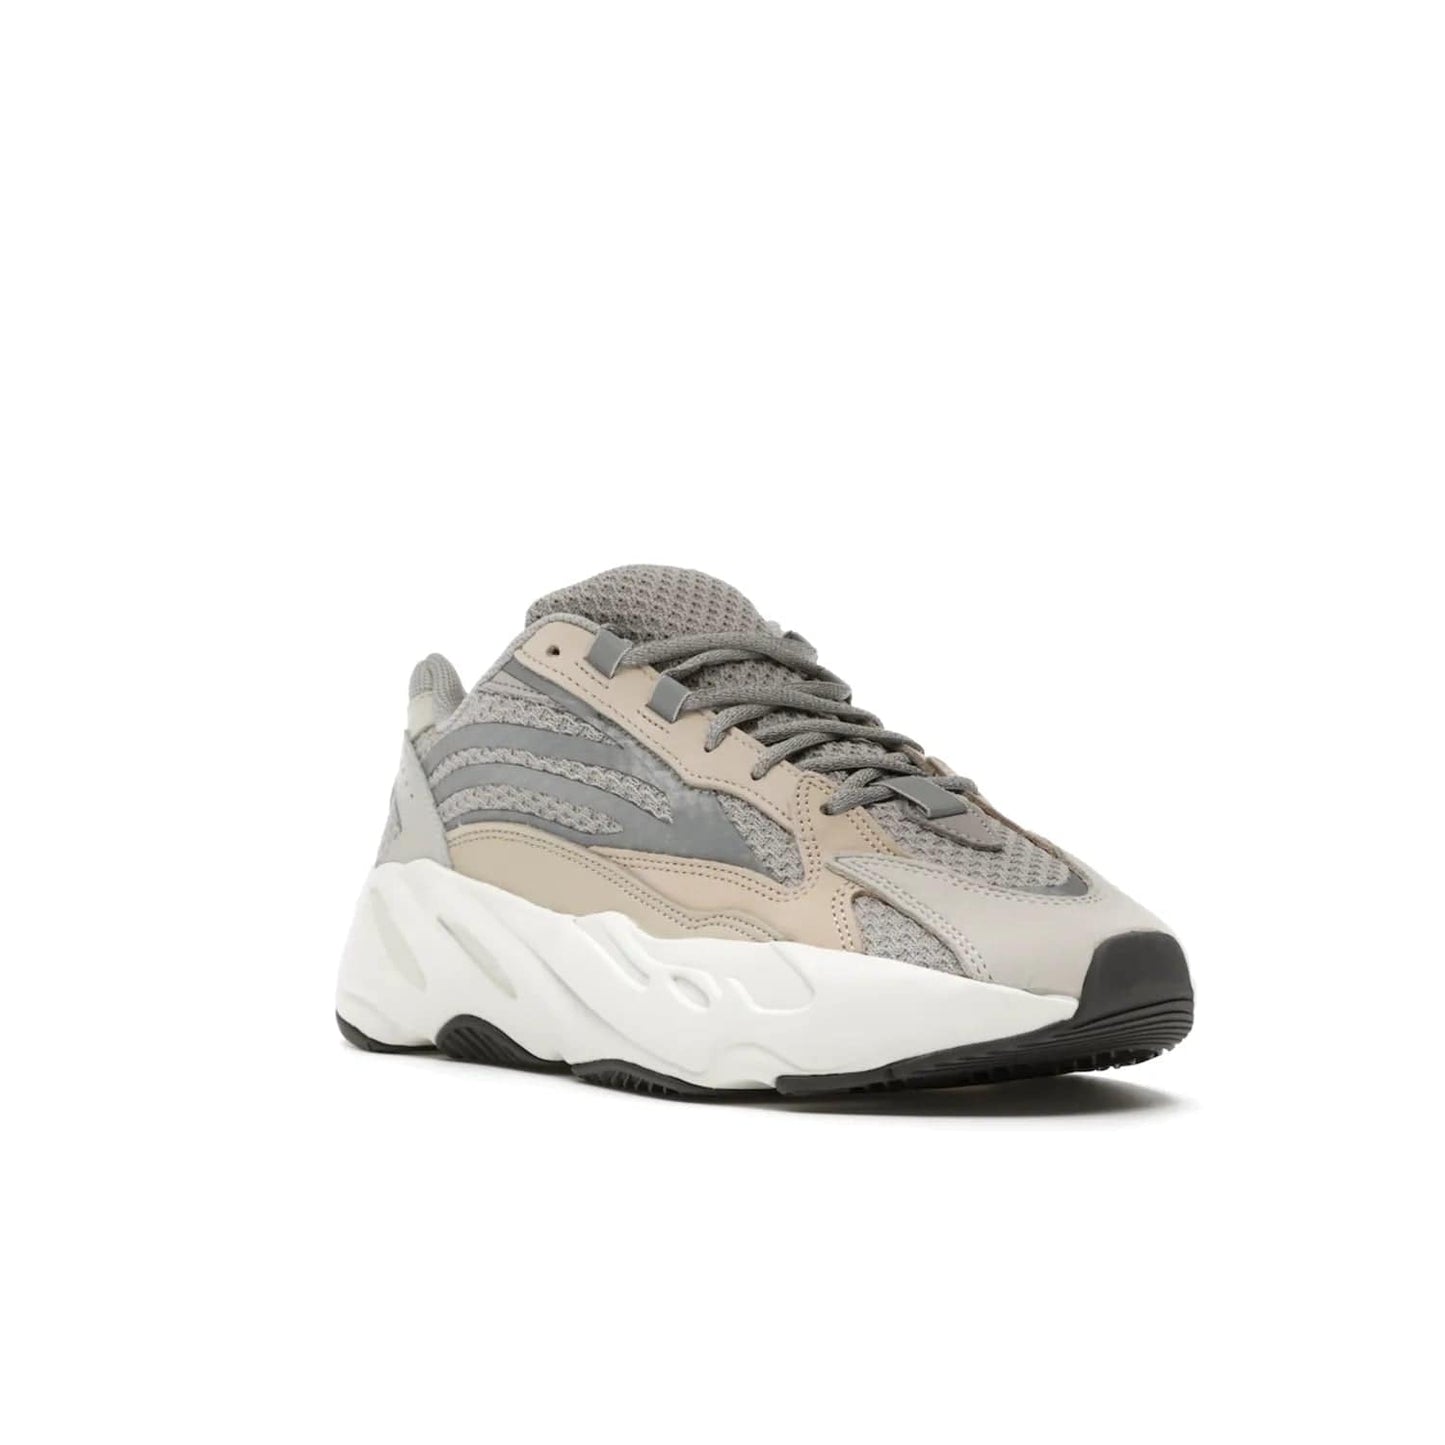 adidas Yeezy Boost 700 V2 Cream - Image 6 - Only at www.BallersClubKickz.com - Add style and luxury to your wardrobe with the adidas Yeezy 700 V2 Cream. Featuring a unique reflective upper, leather overlays, mesh underlays and the signature BOOST midsole, this silhouette is perfect for any stylish wardrobe.